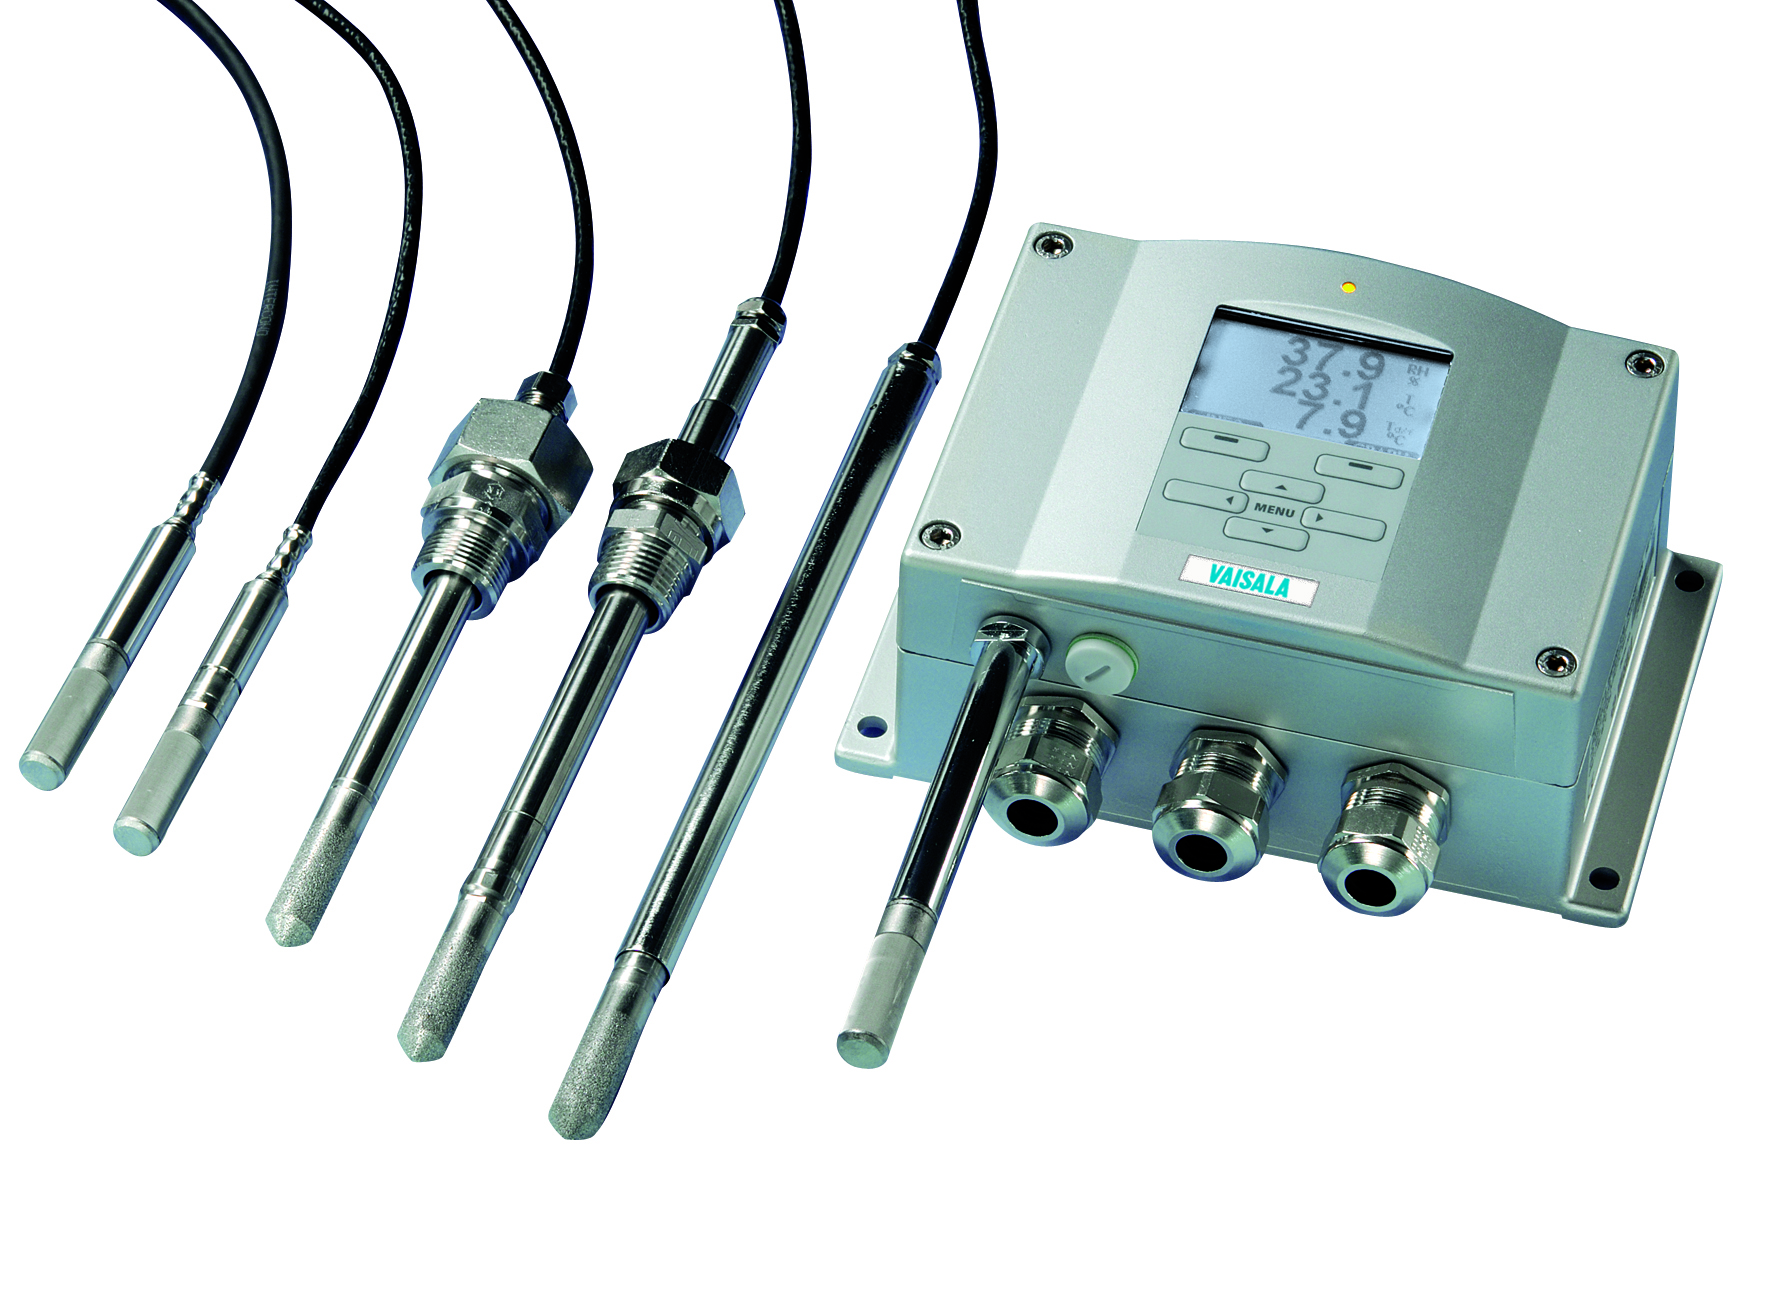 HMT330 Humidity and Temperature Transmitter for demanding humidity measurements is available throughout Austria from Industrie Automation Graz, IAG.